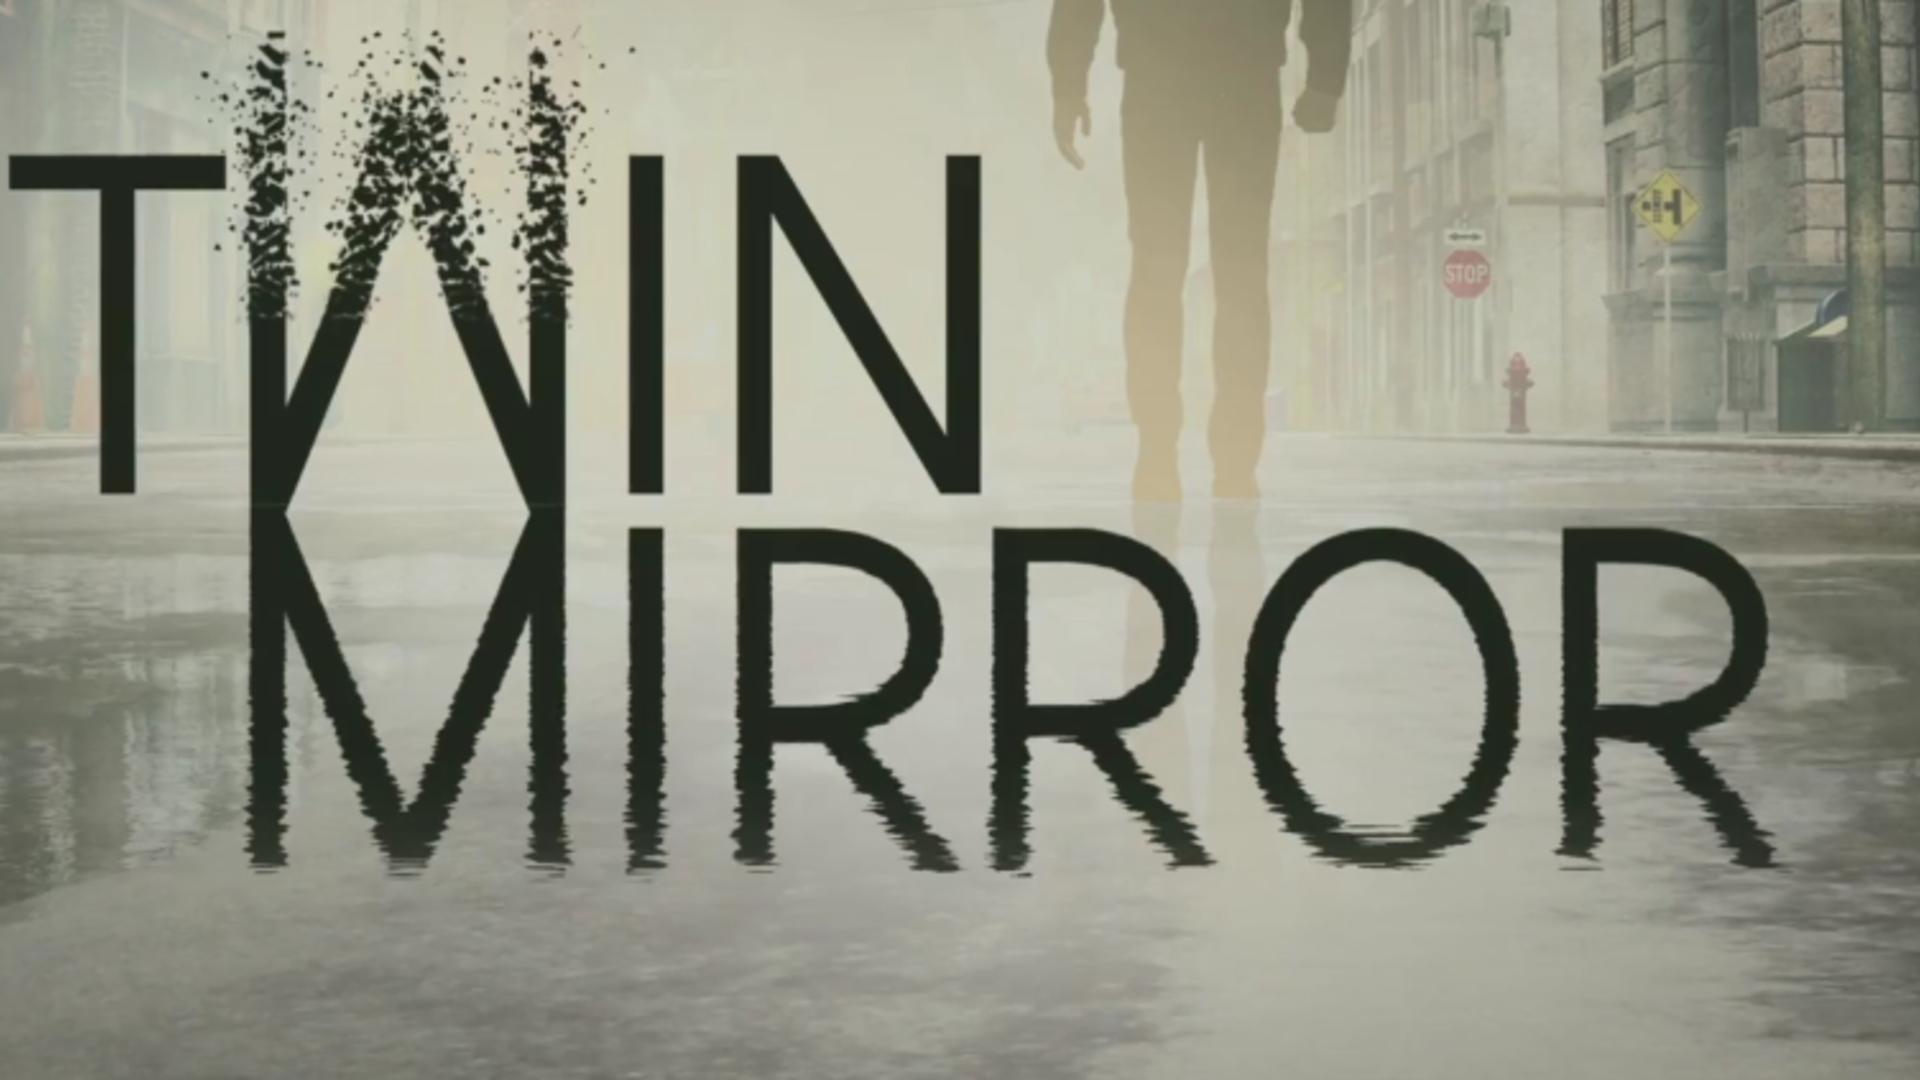 Life is Strange Studio Announces Trippy New Mystery Game, Twin Mirror for PS Xbox One, and PC